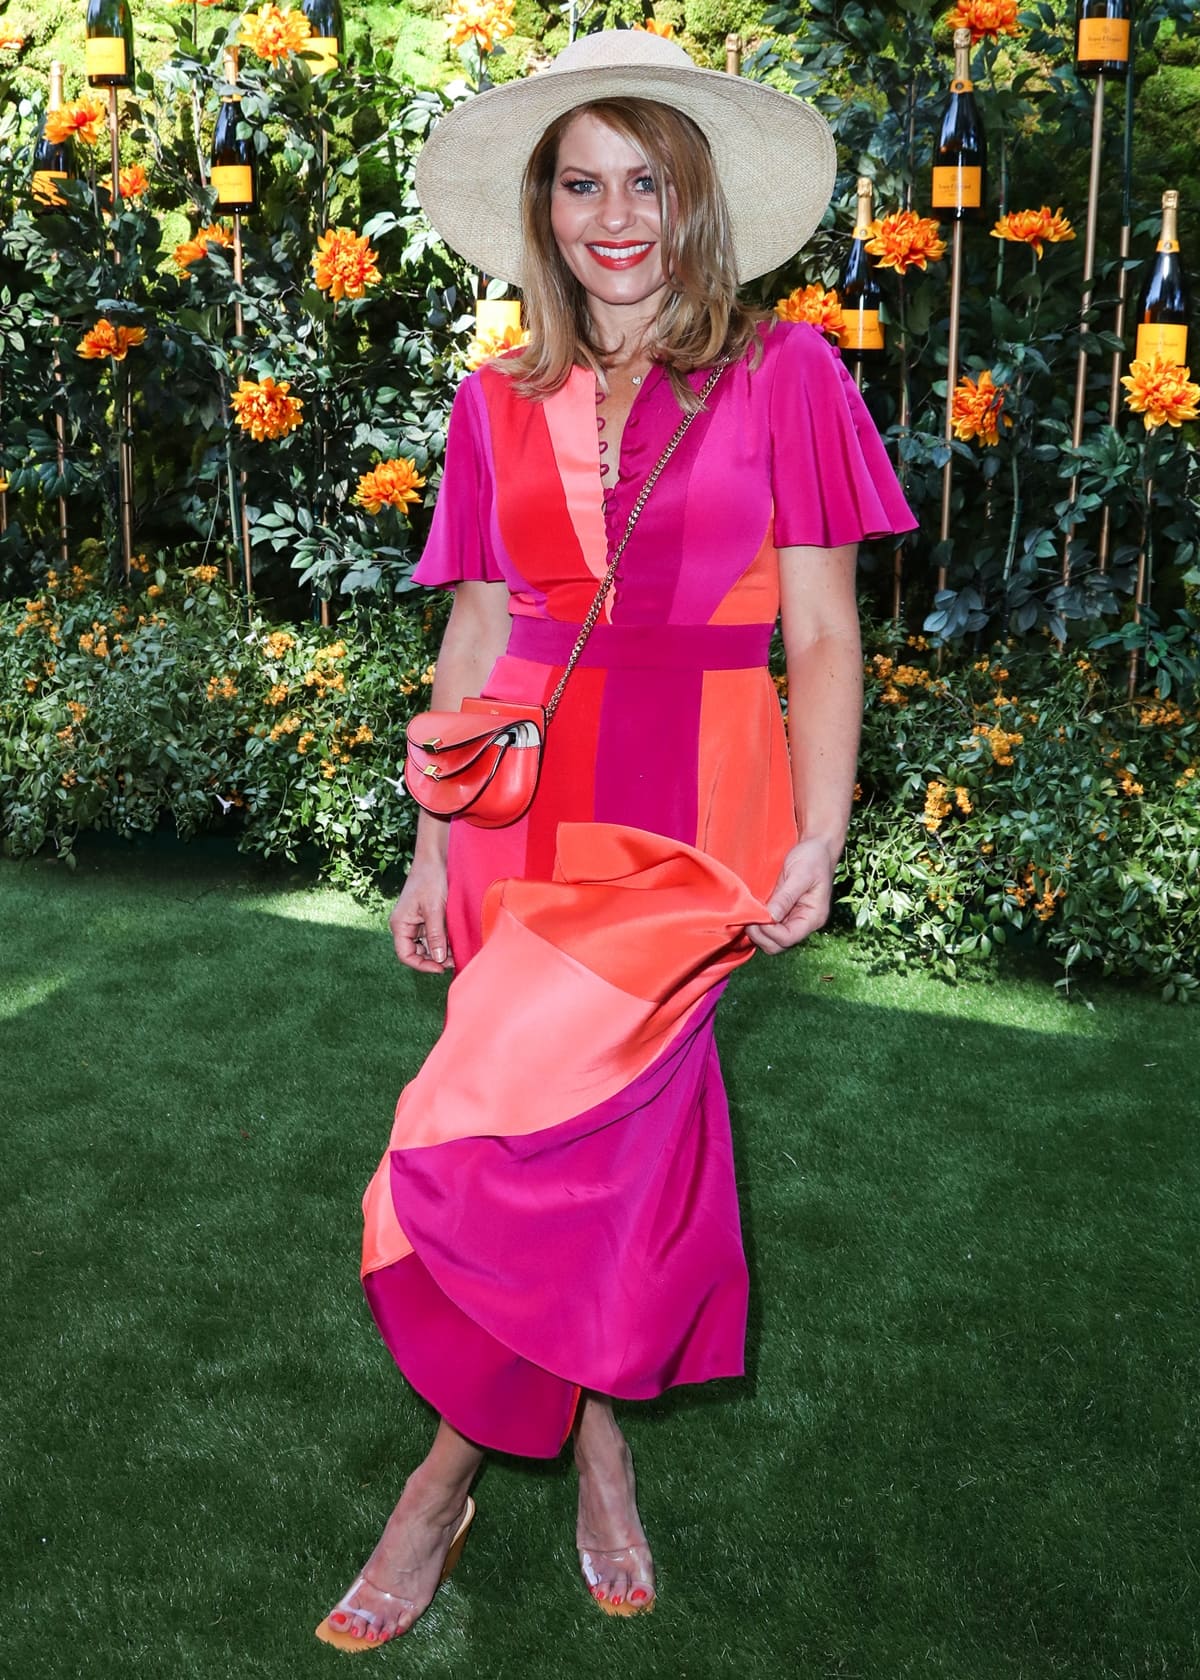 Christian actress Candace Cameron Bure in a Prabal Gurung dress at the 10th Annual Veuve Clicquot Polo Classic Los Angeles